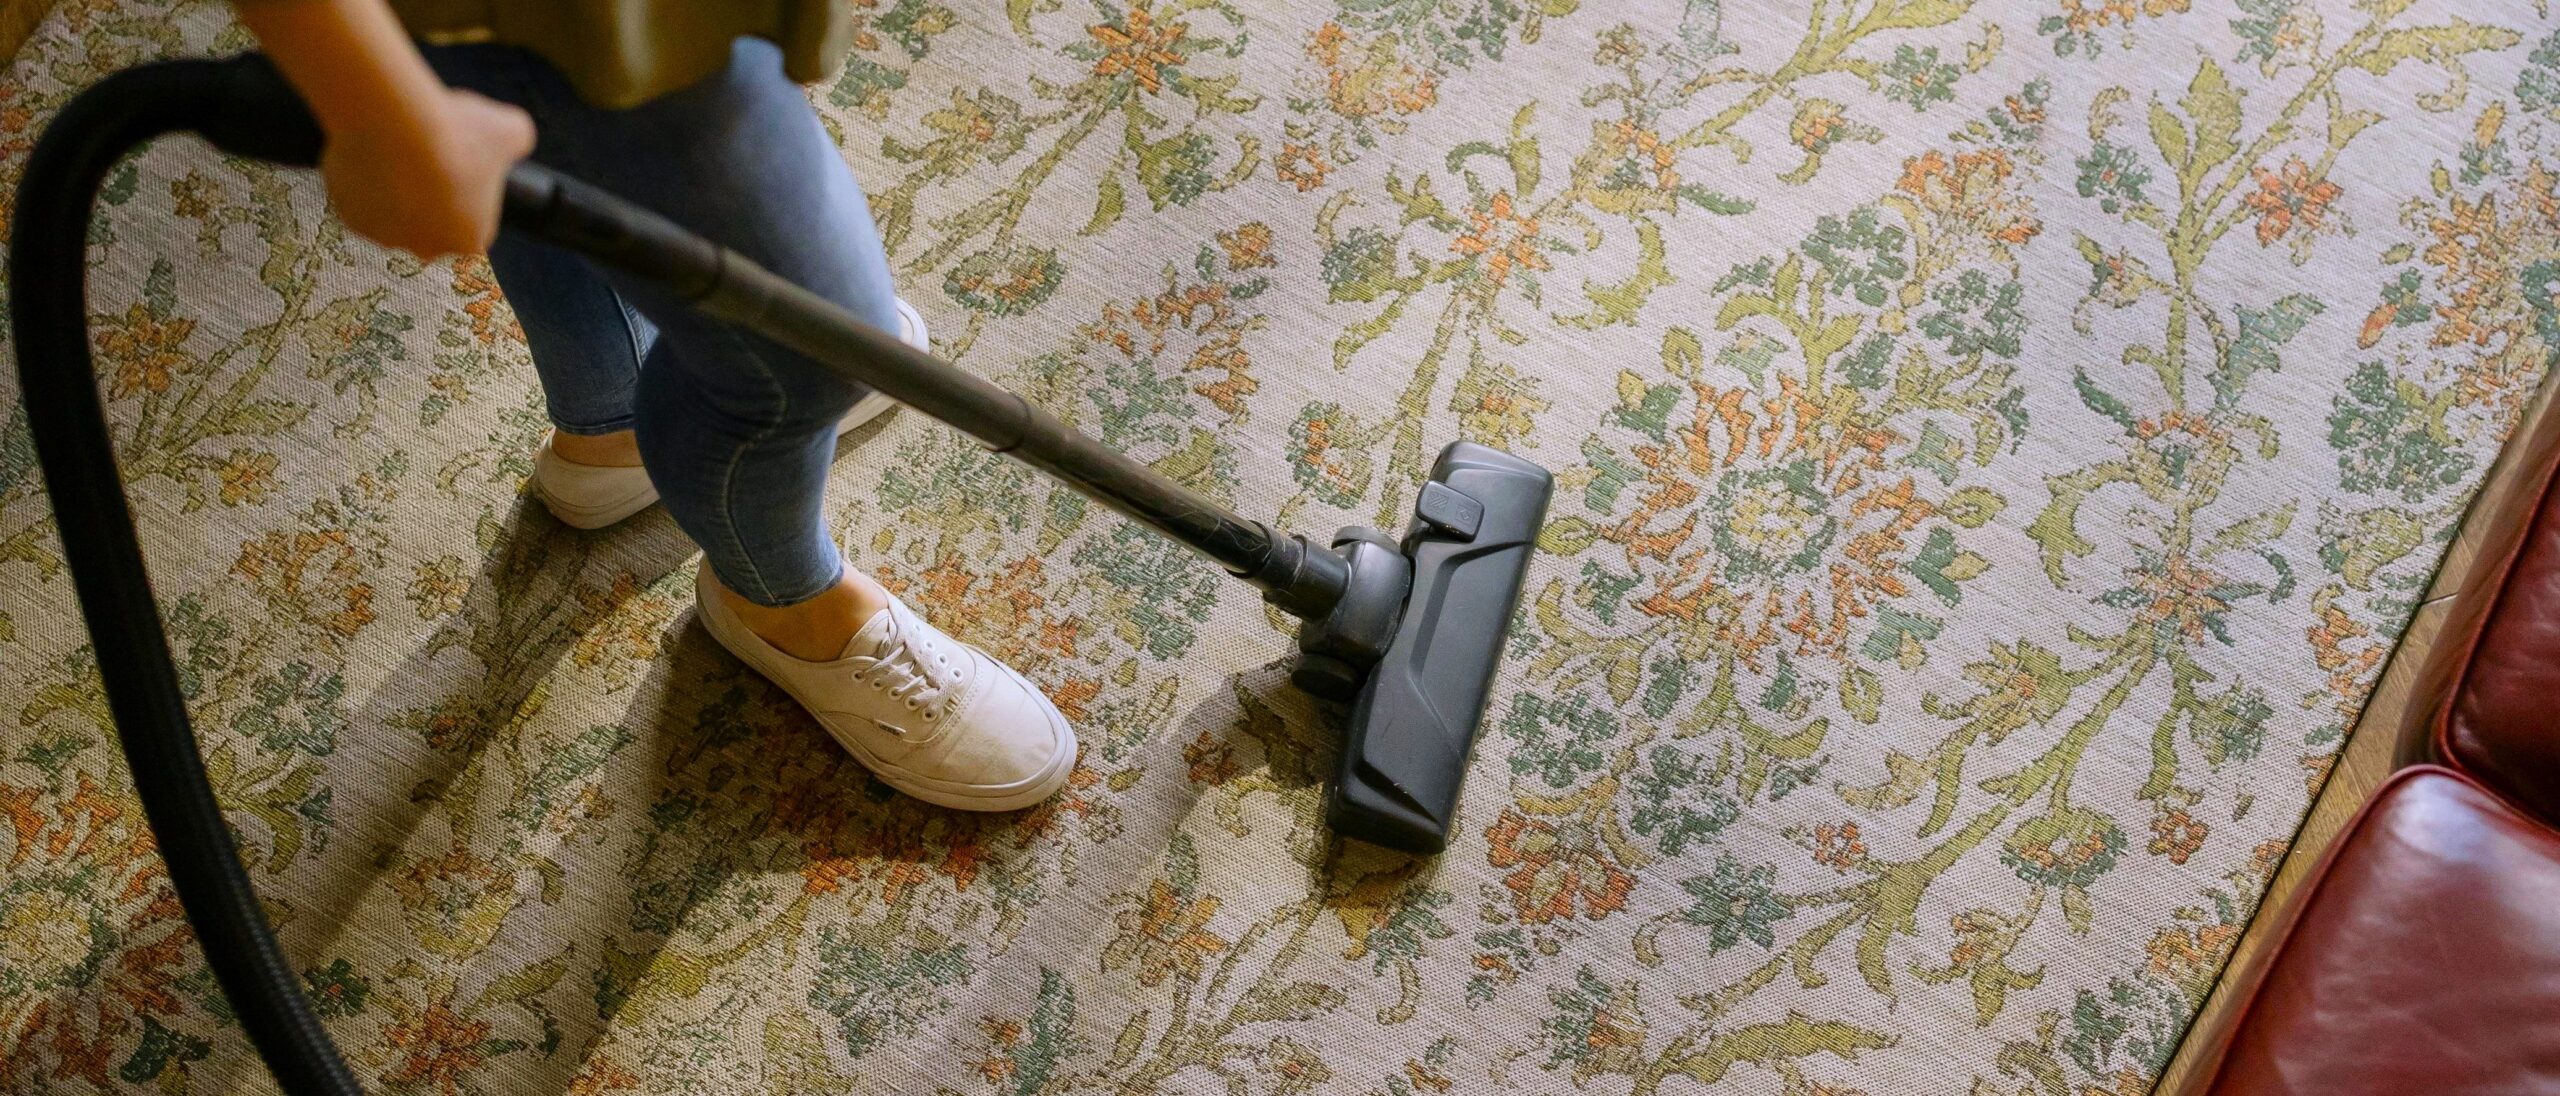 It is best to use a simple suction vacuum when maintaining rugs. Beater bars can cause damage.